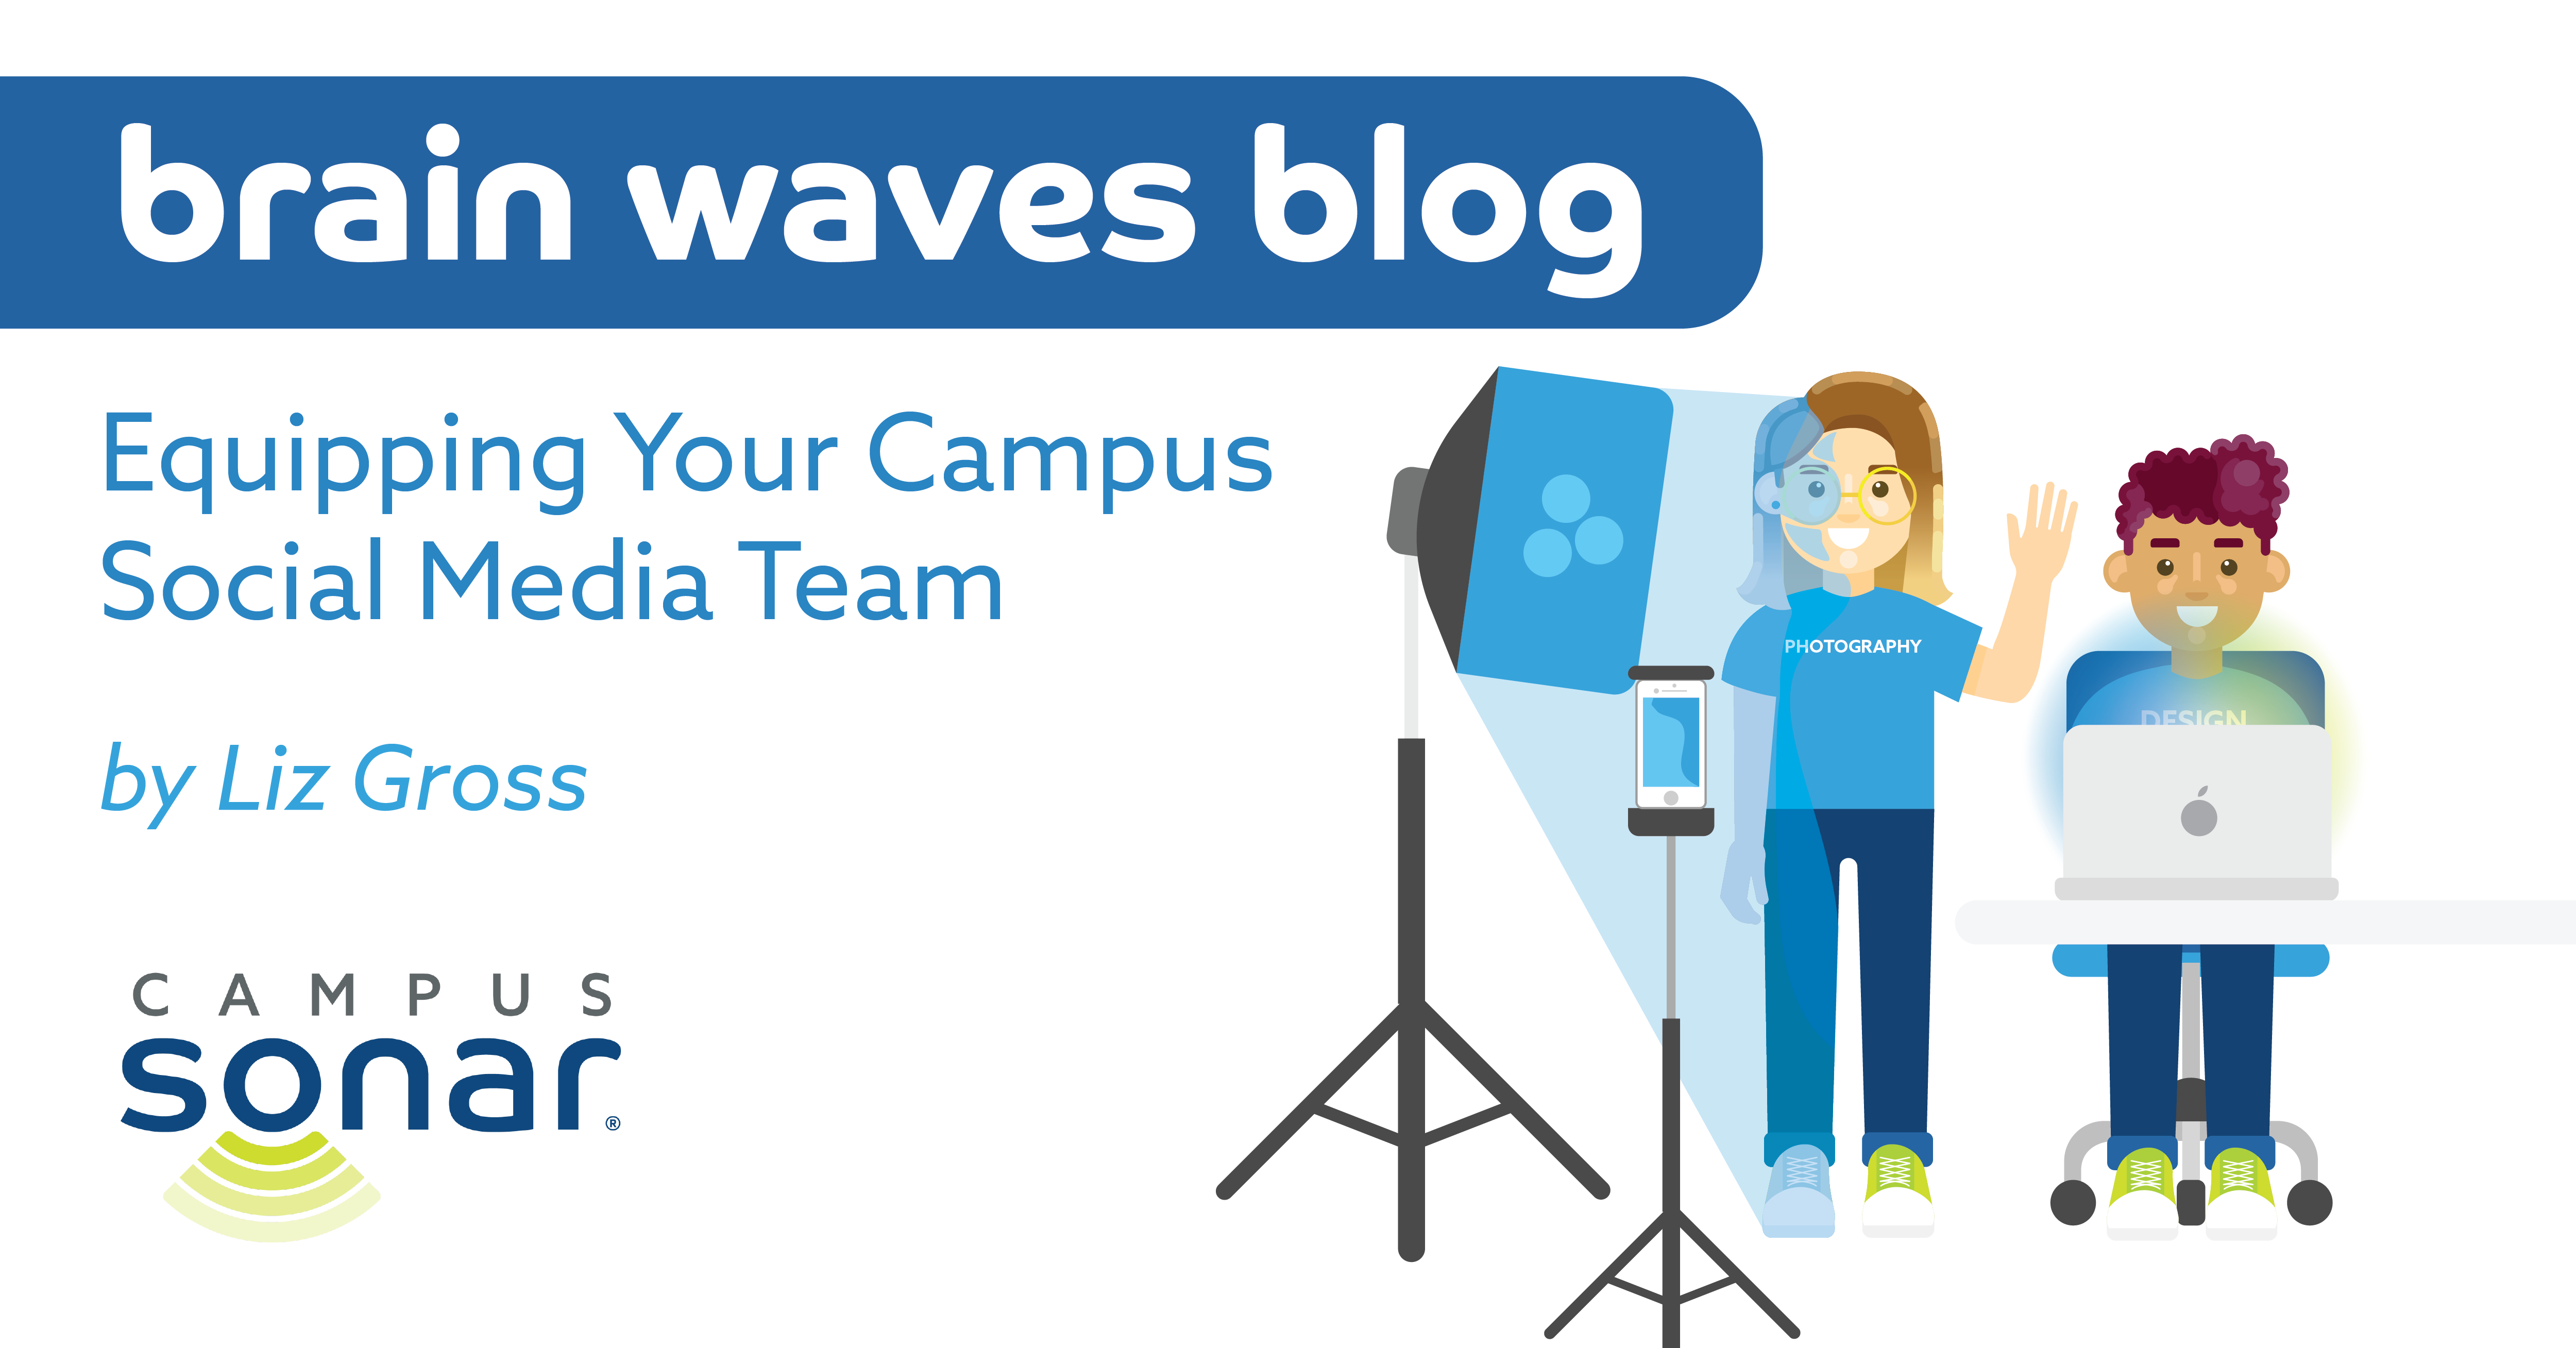 Brain Waves Blog: Equipping Your Campus Social Media Team